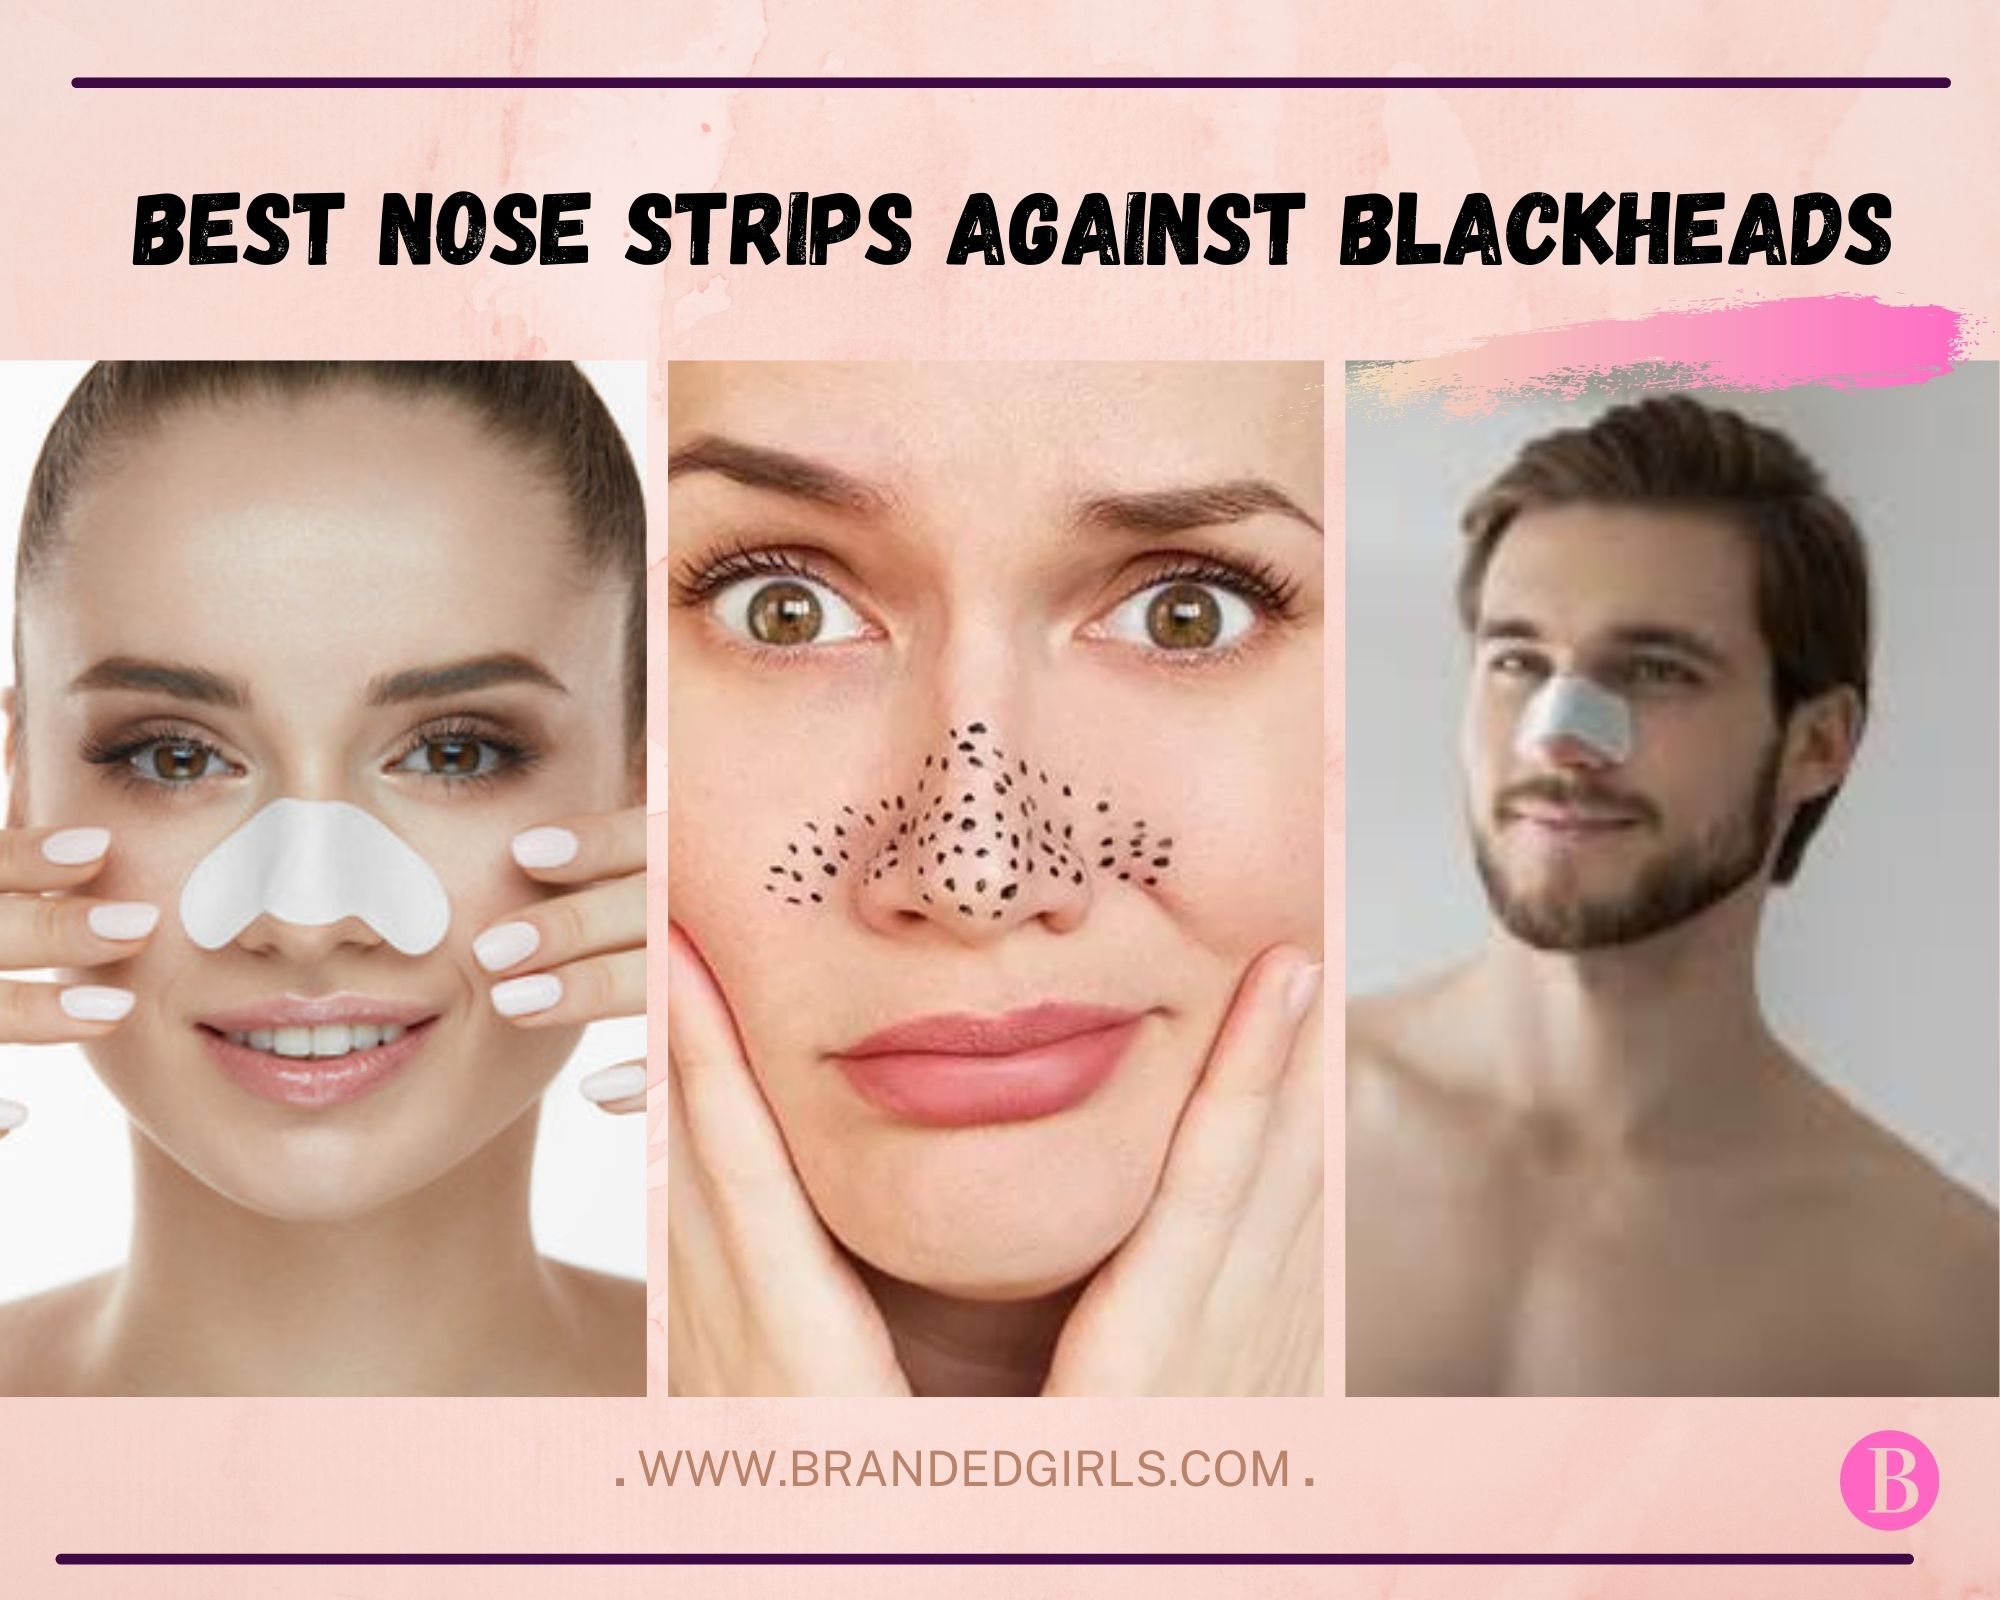 Top 10 Best Nose Strips That Work